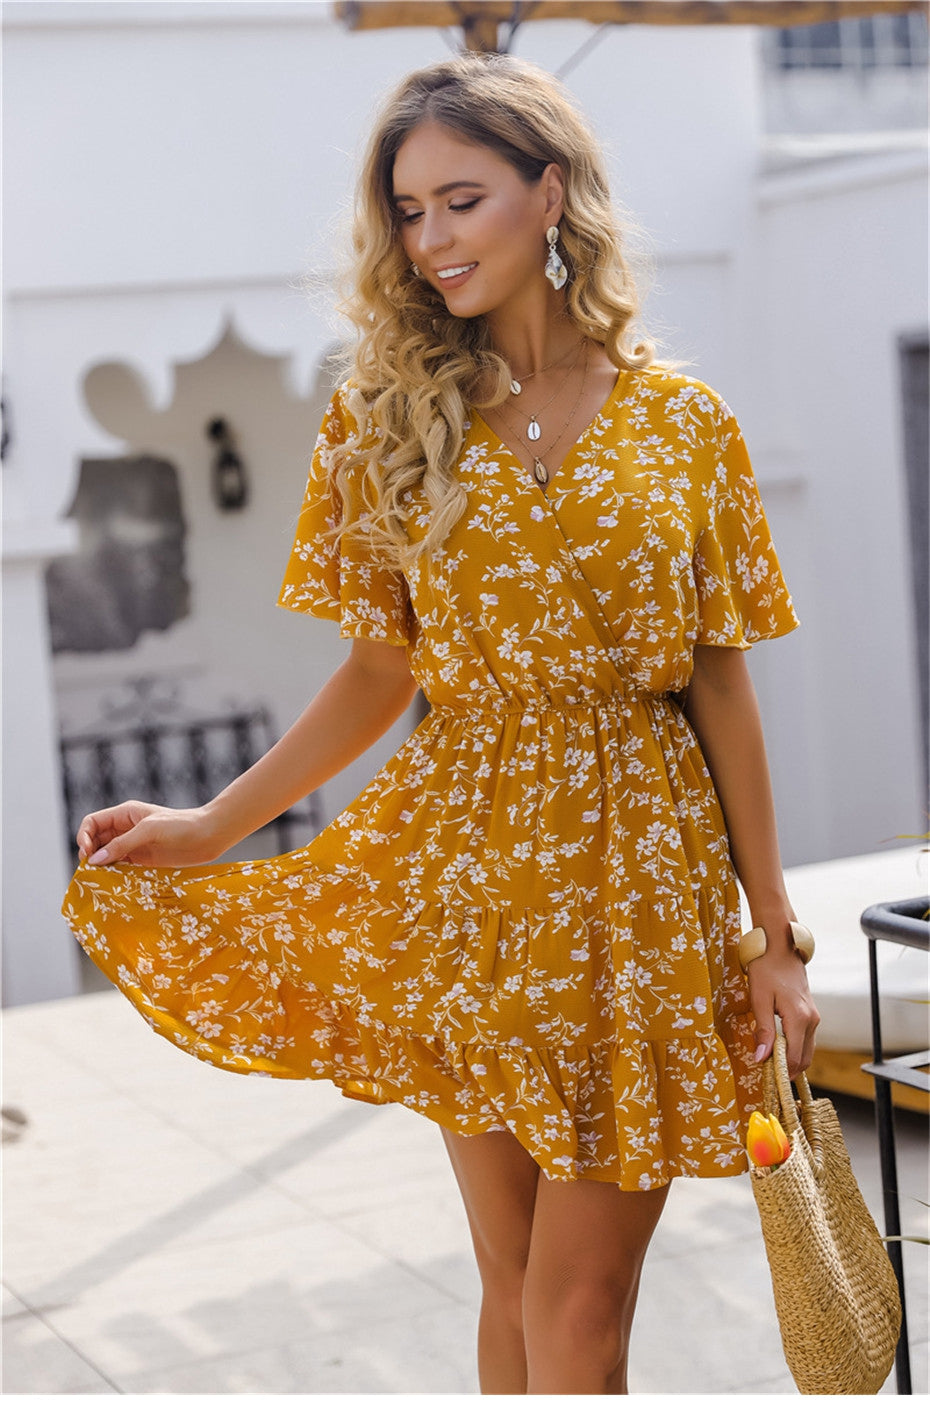 Women 2021 New Spring Summer Sexy Short Floral Dress Butterfly Sleeve V Neck Print Party Dresses For Women Casual Ruffles